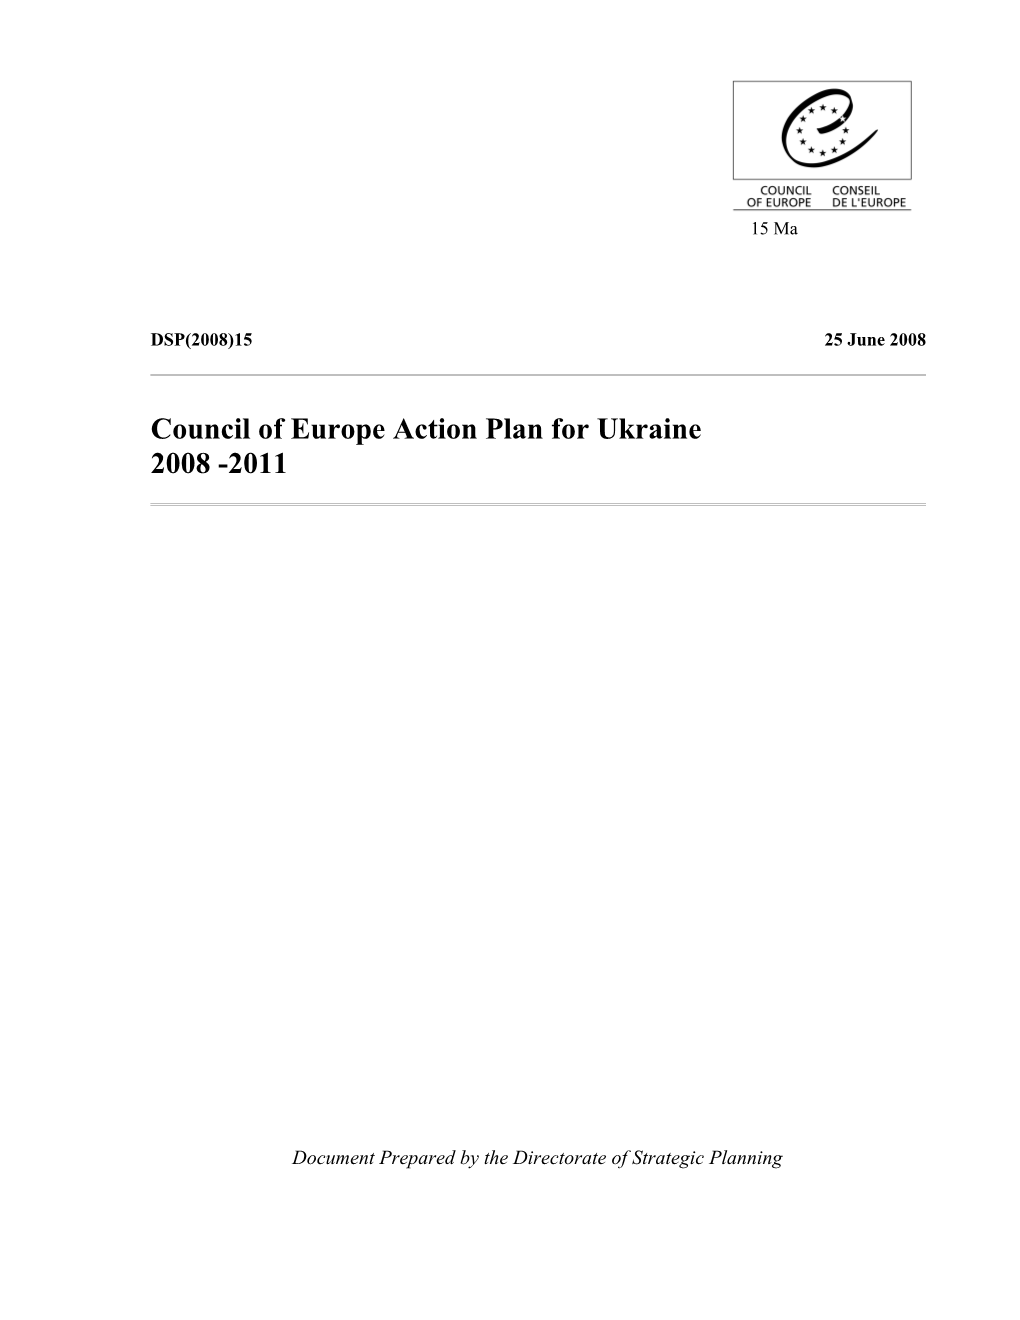 Outline of the Action Plan on Co-Operation with Ukraine 2008-2011